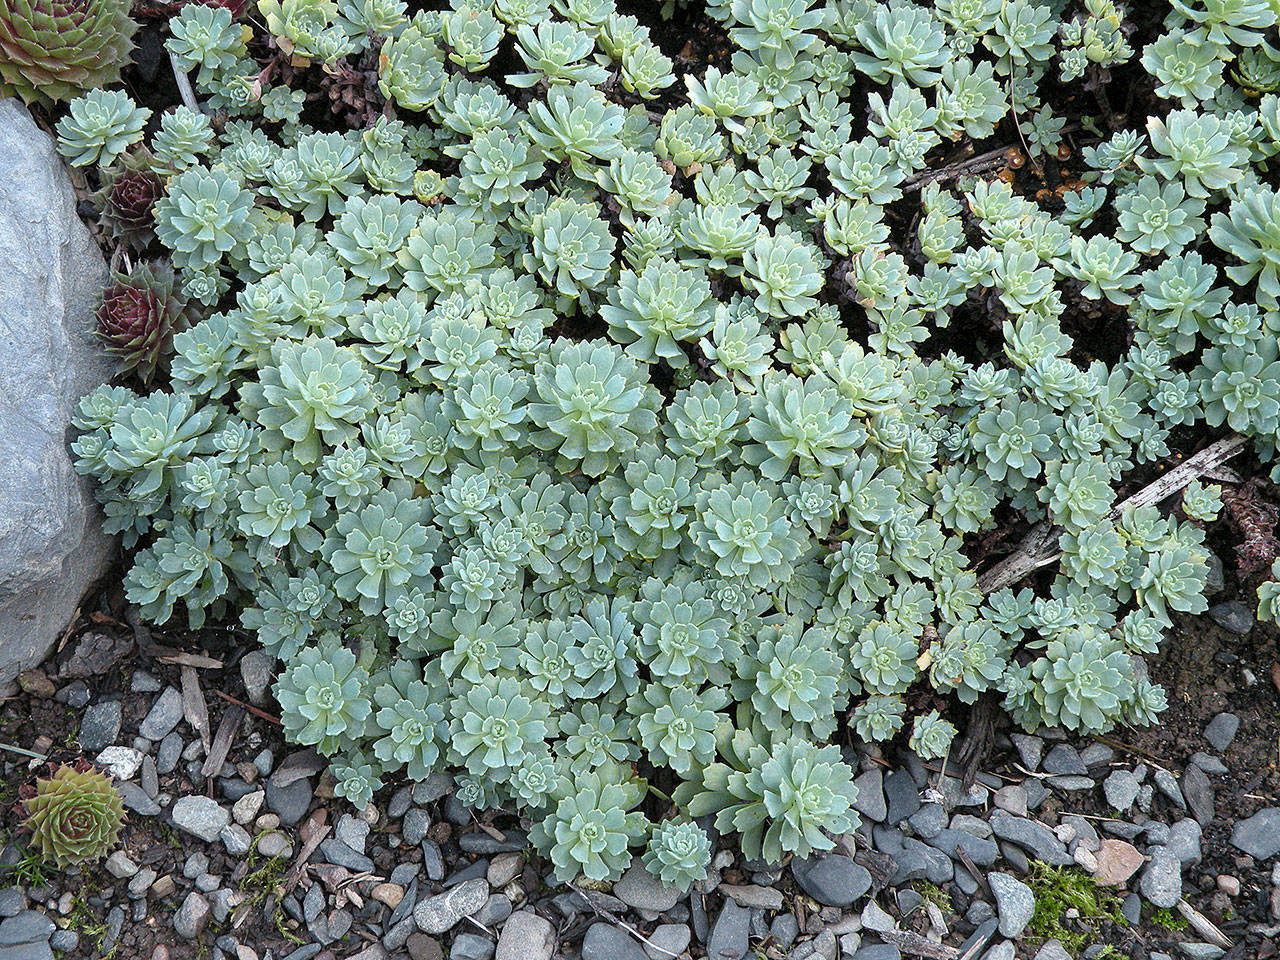 Afghani sedum is an excellent groundcover that forms a flat, dense mound of glossy blue-green leaves. (Rick Peterson)